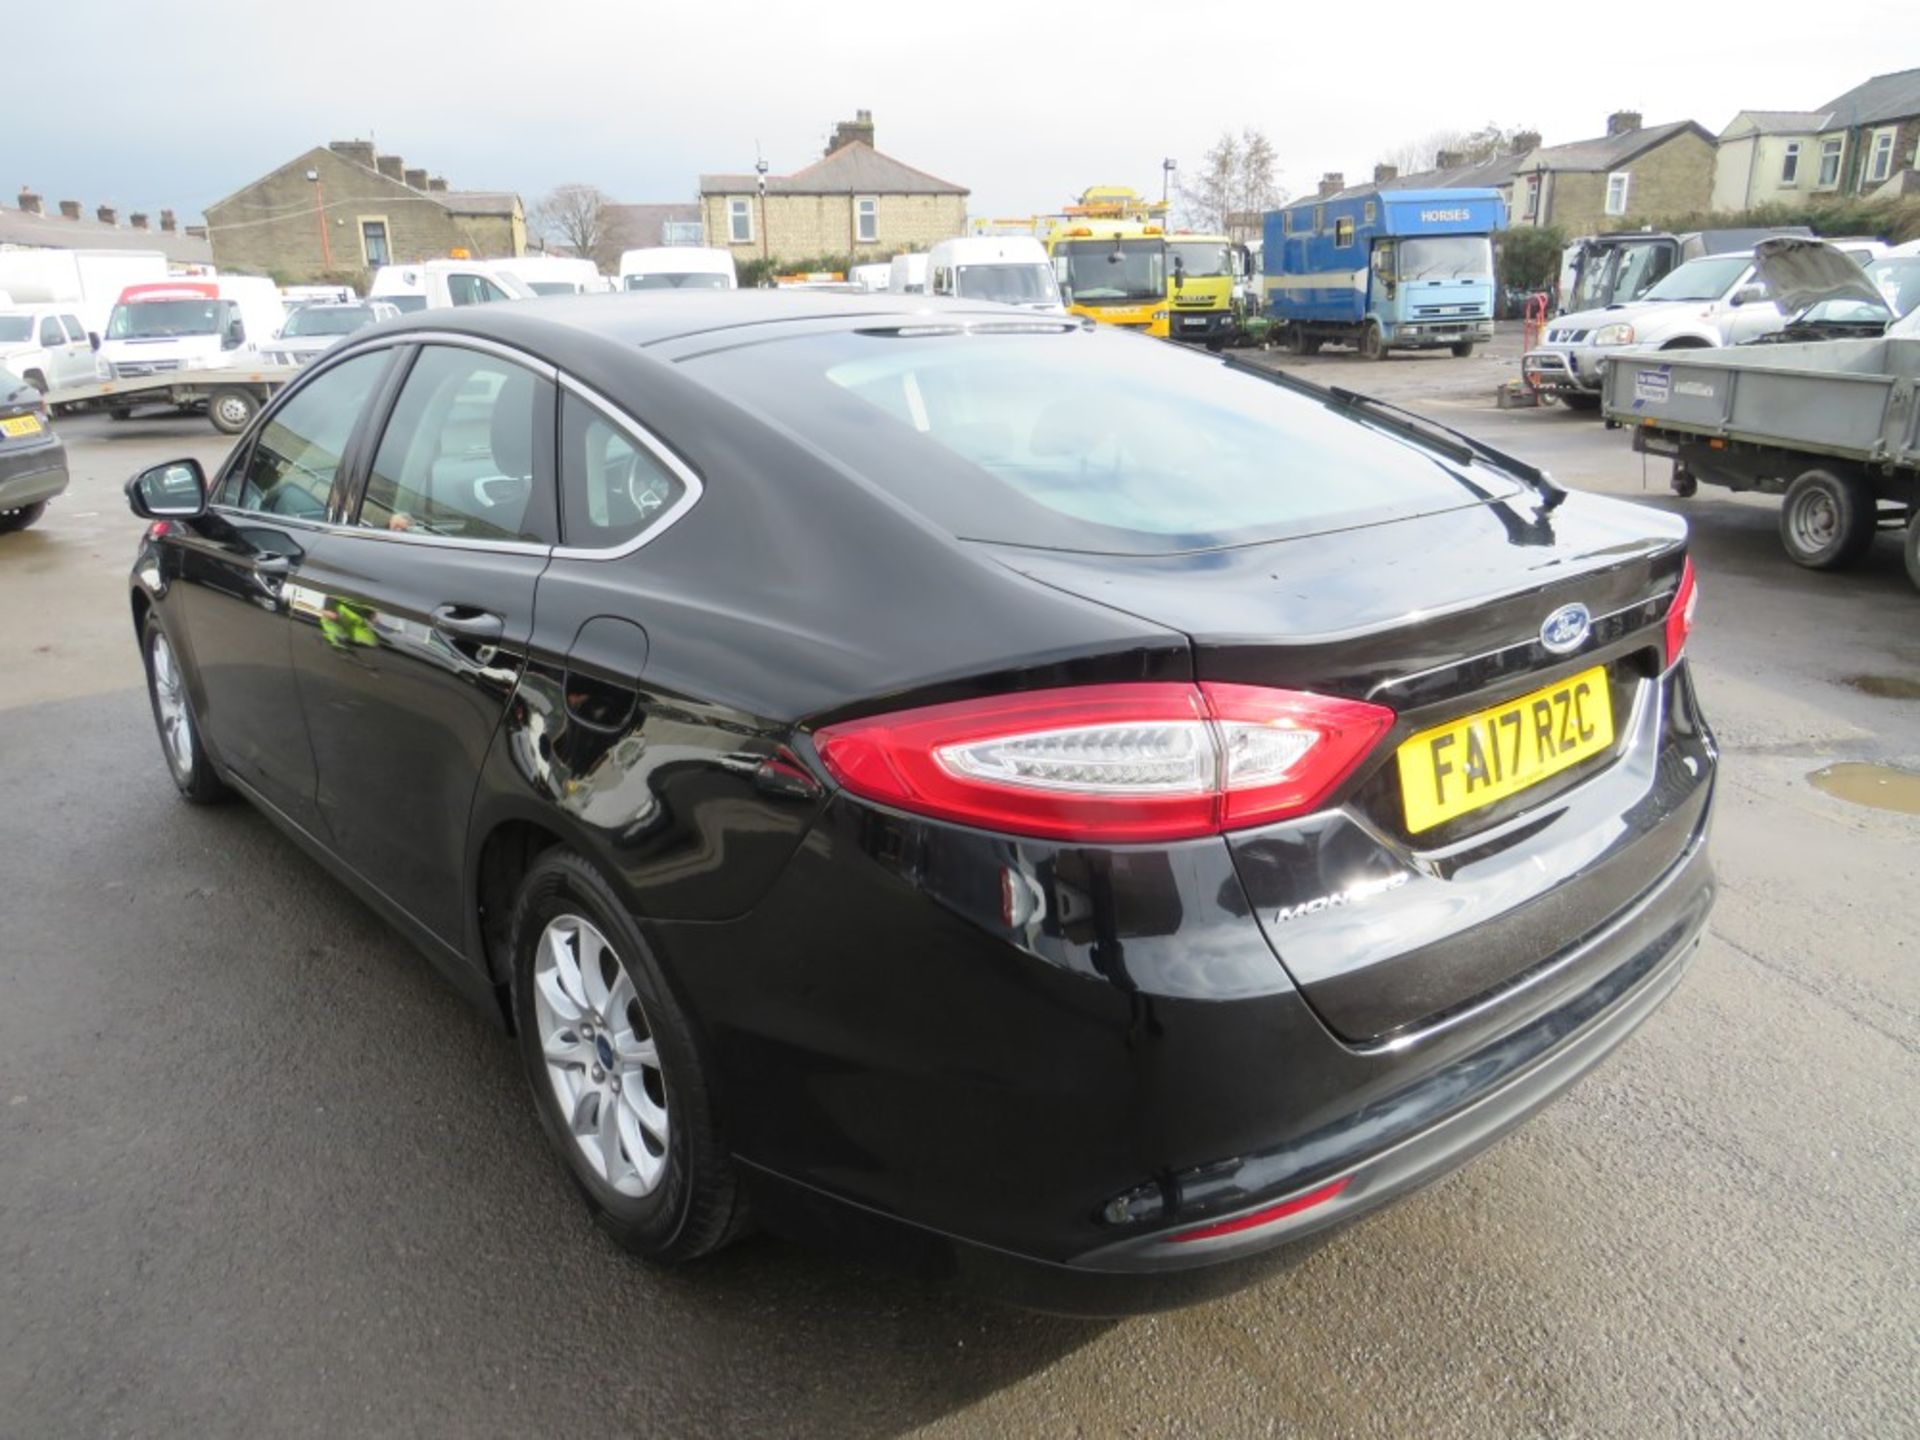 17 reg FORD MONDEO ZETEC ECONETIC TDCI, 1ST REG 08/17, TEST 08/21, 136043M, V5 HERE, 1 OWNER FROM - Image 3 of 6